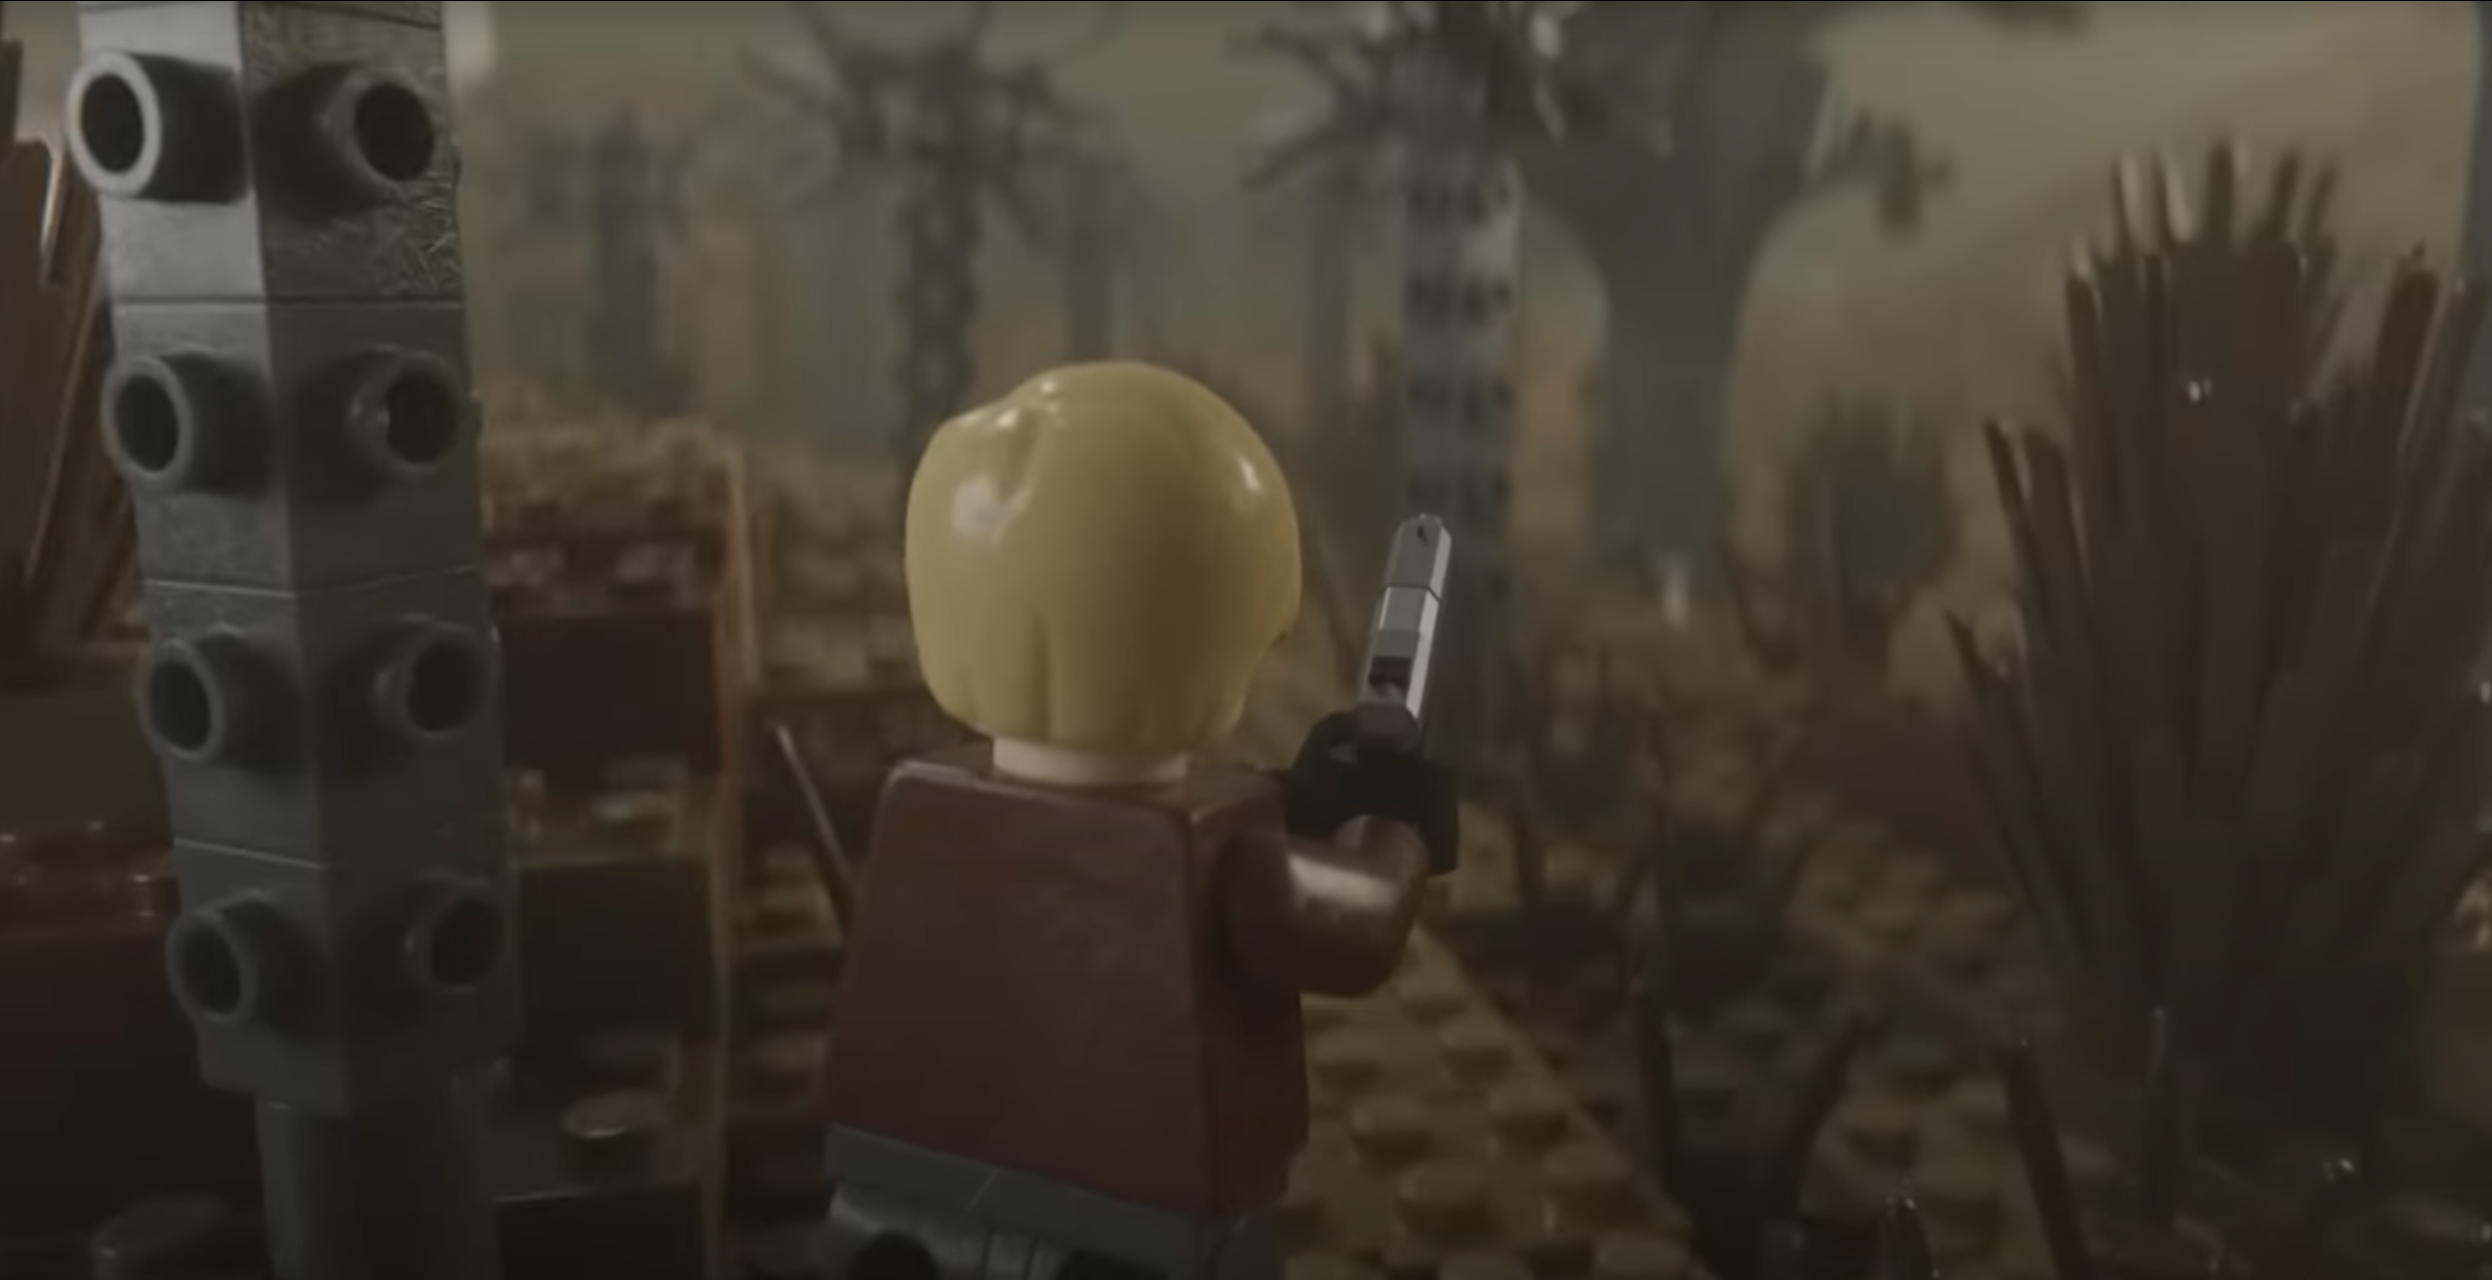 a screencap of a YouTuber’s Lego remake of Resident Evil 4, showing Lego Leon S. Kennedy walking through some Lego woods. 